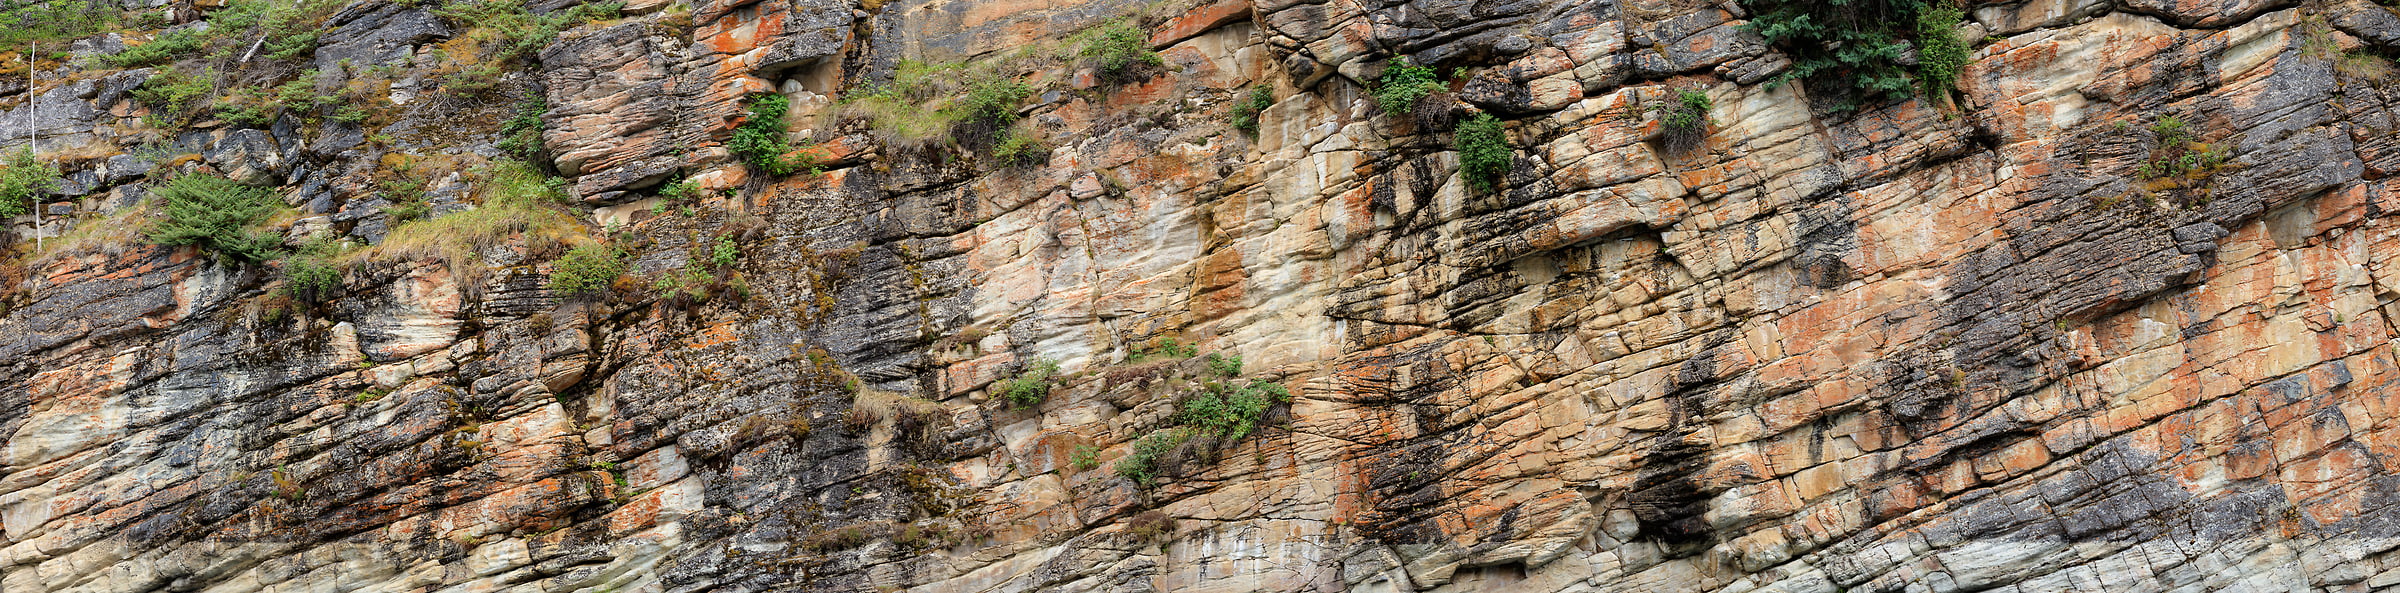 795 megapixels! A very high resolution, large-format VAST photo print of a rock wall; photograph created by Scott Dimond in Jasper National Park, Alberta, Canada.